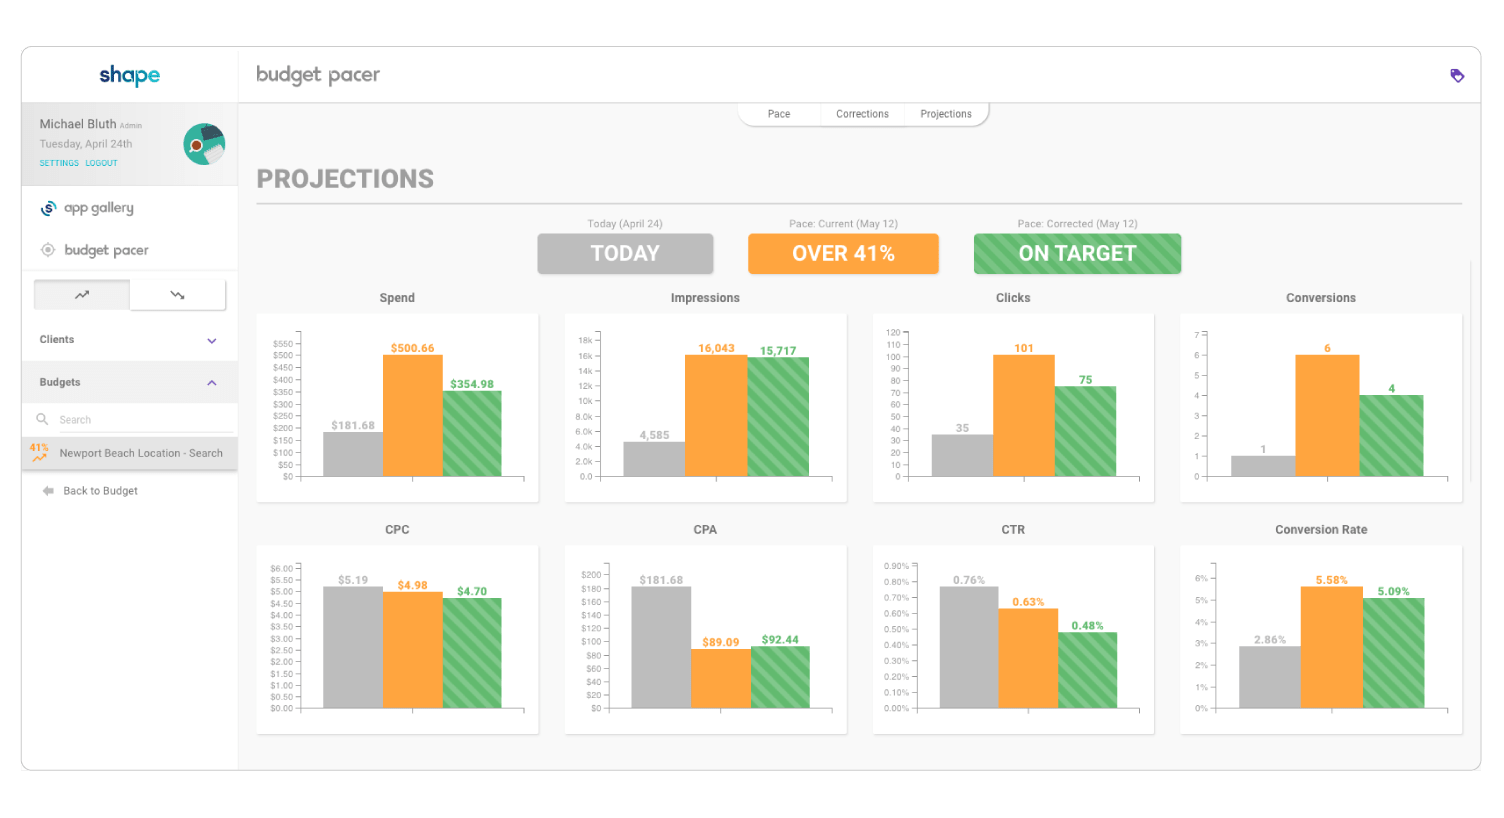 Budget Pacer dashboard shows recommendations with estimated metric changes